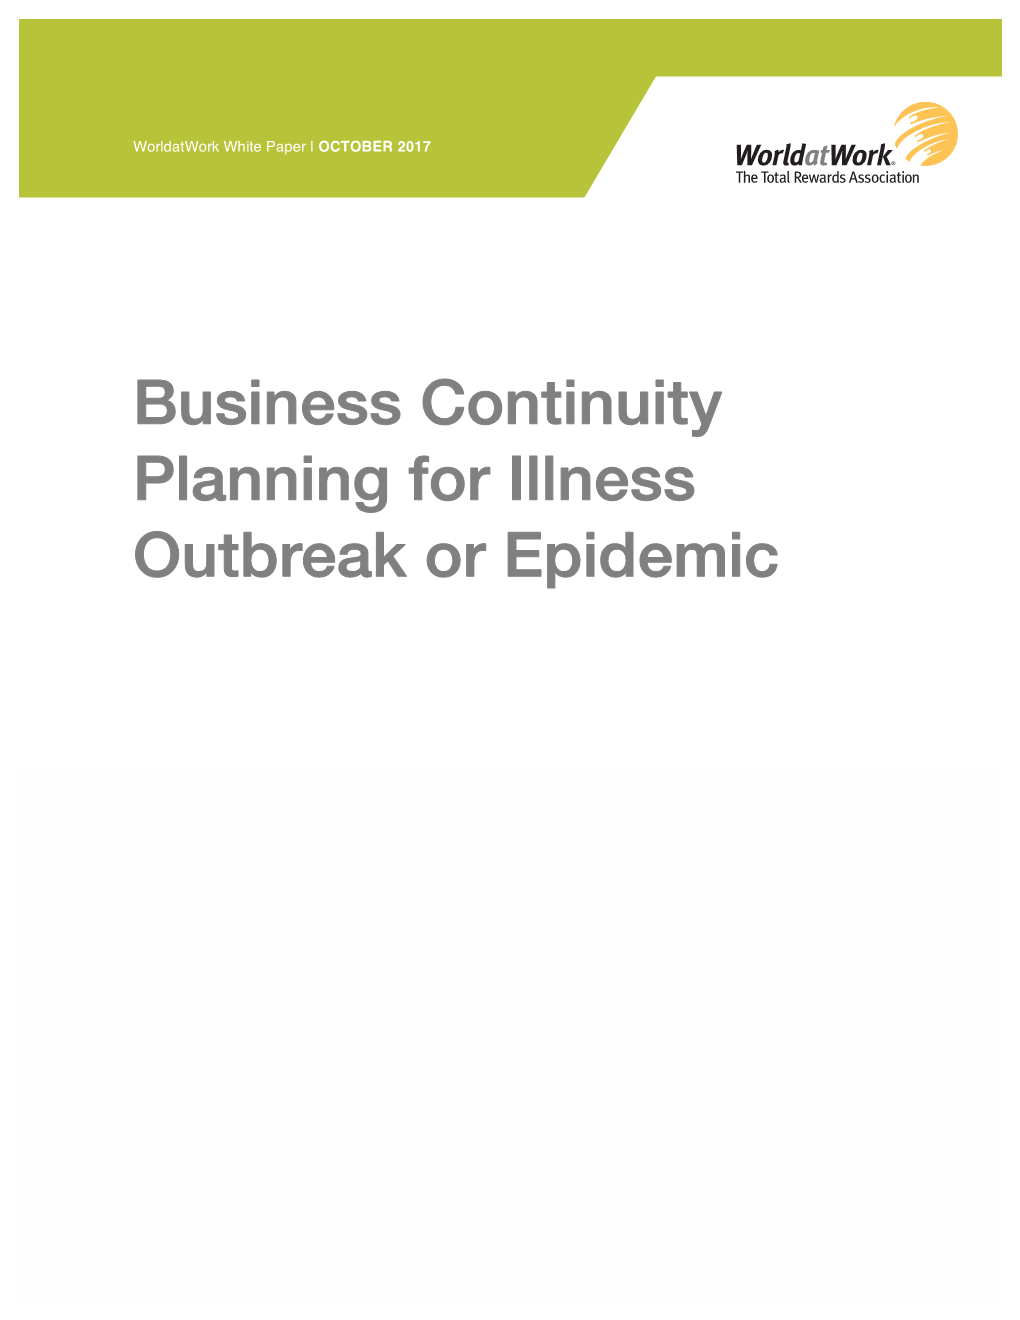 Business Continuity Planning for Illness Outbreak Or Epidemic